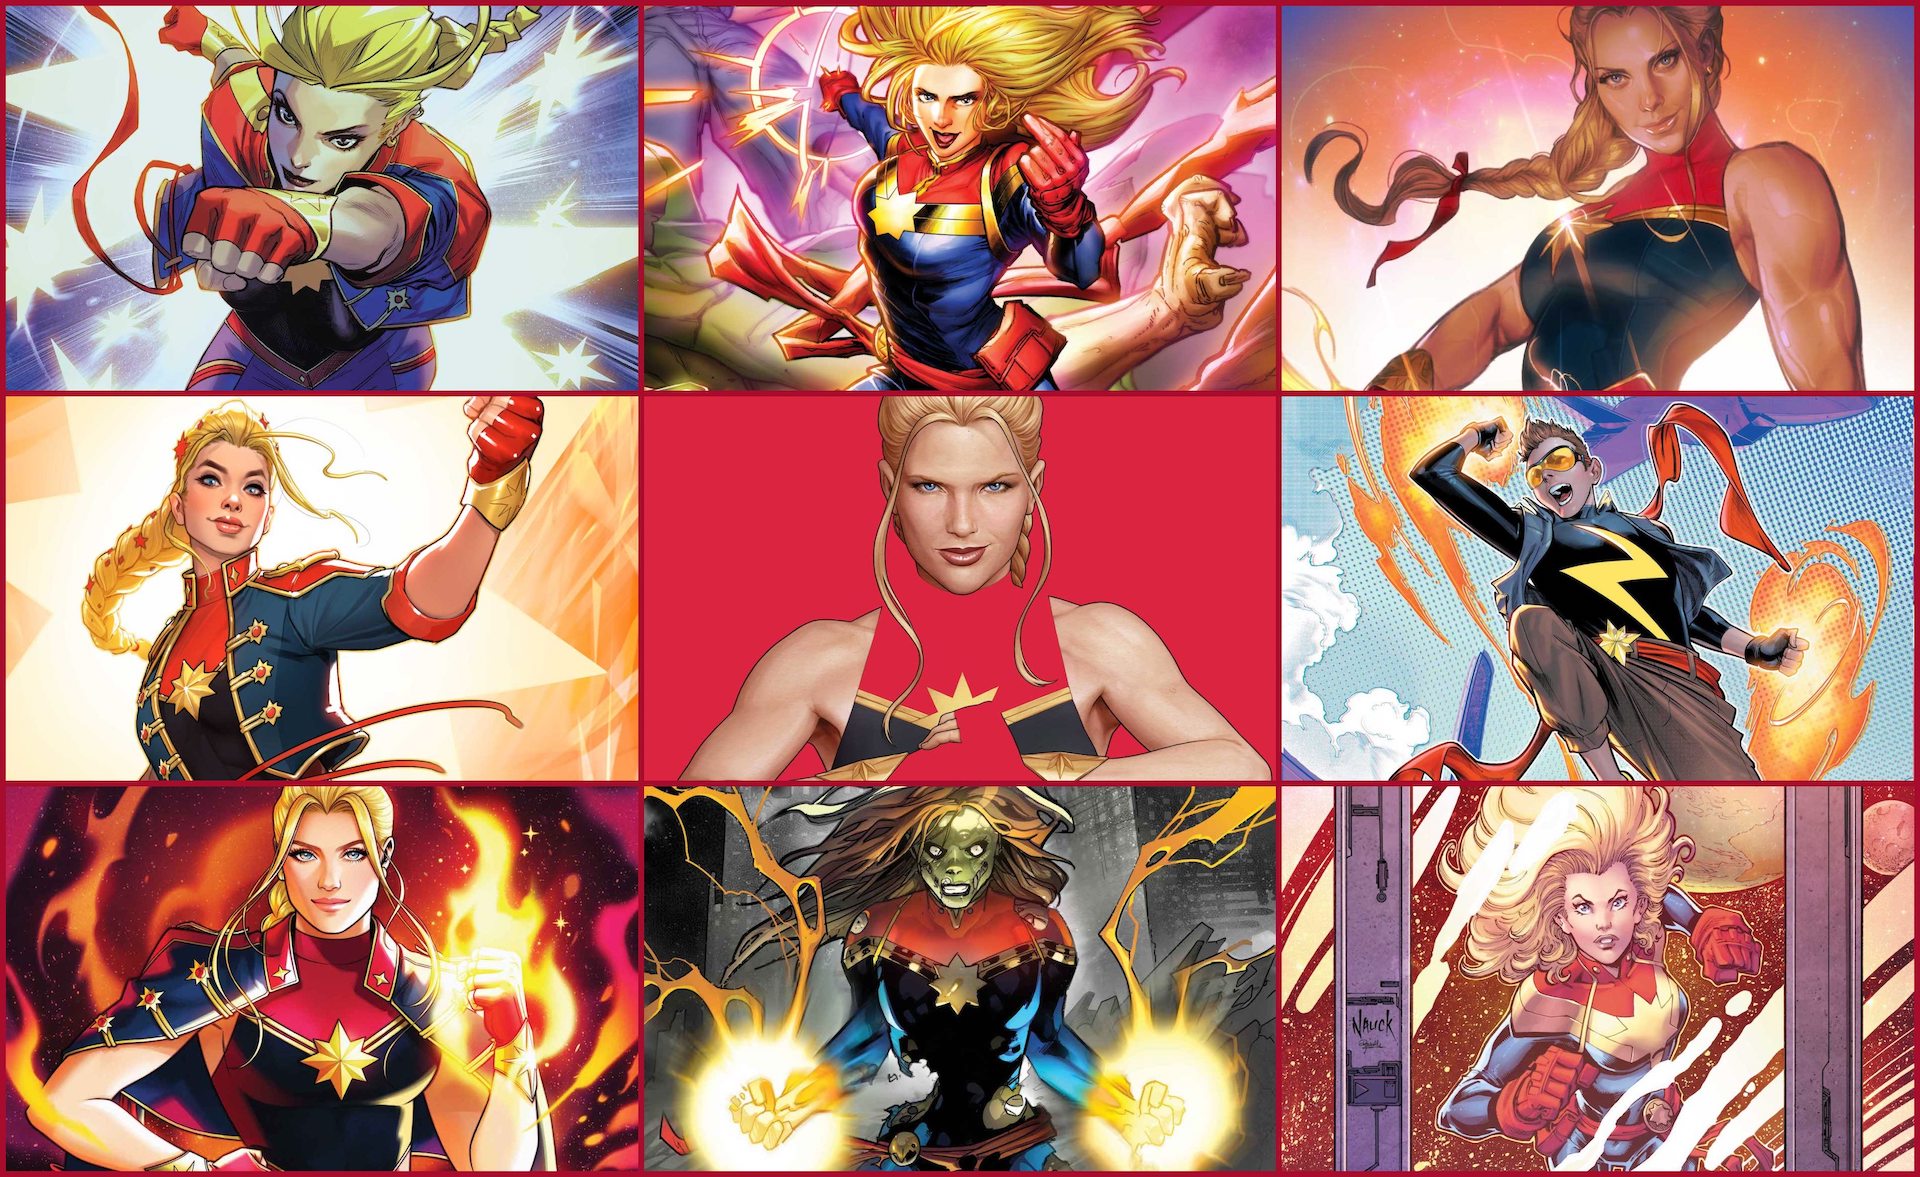 Check out every 'Captain Marvel' #1 cover, out October 25th